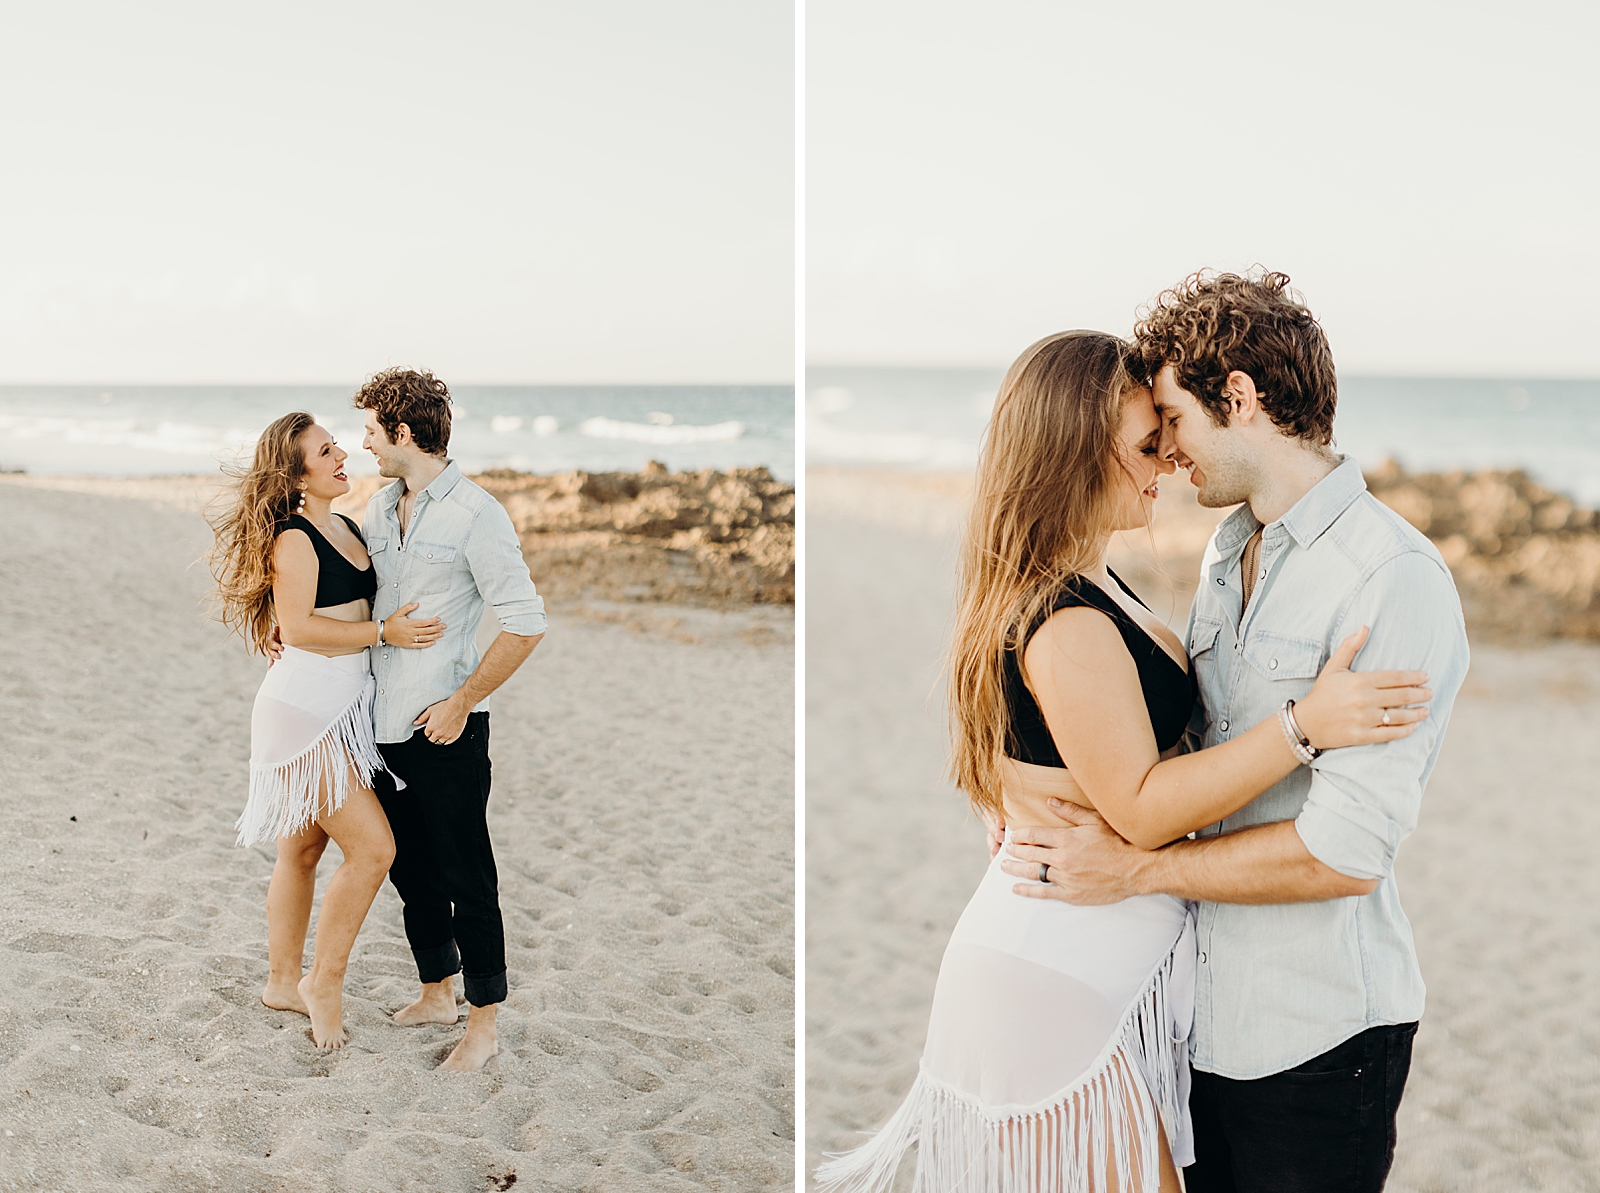 Couple holding each other barefoot on the beach and smiling at each other